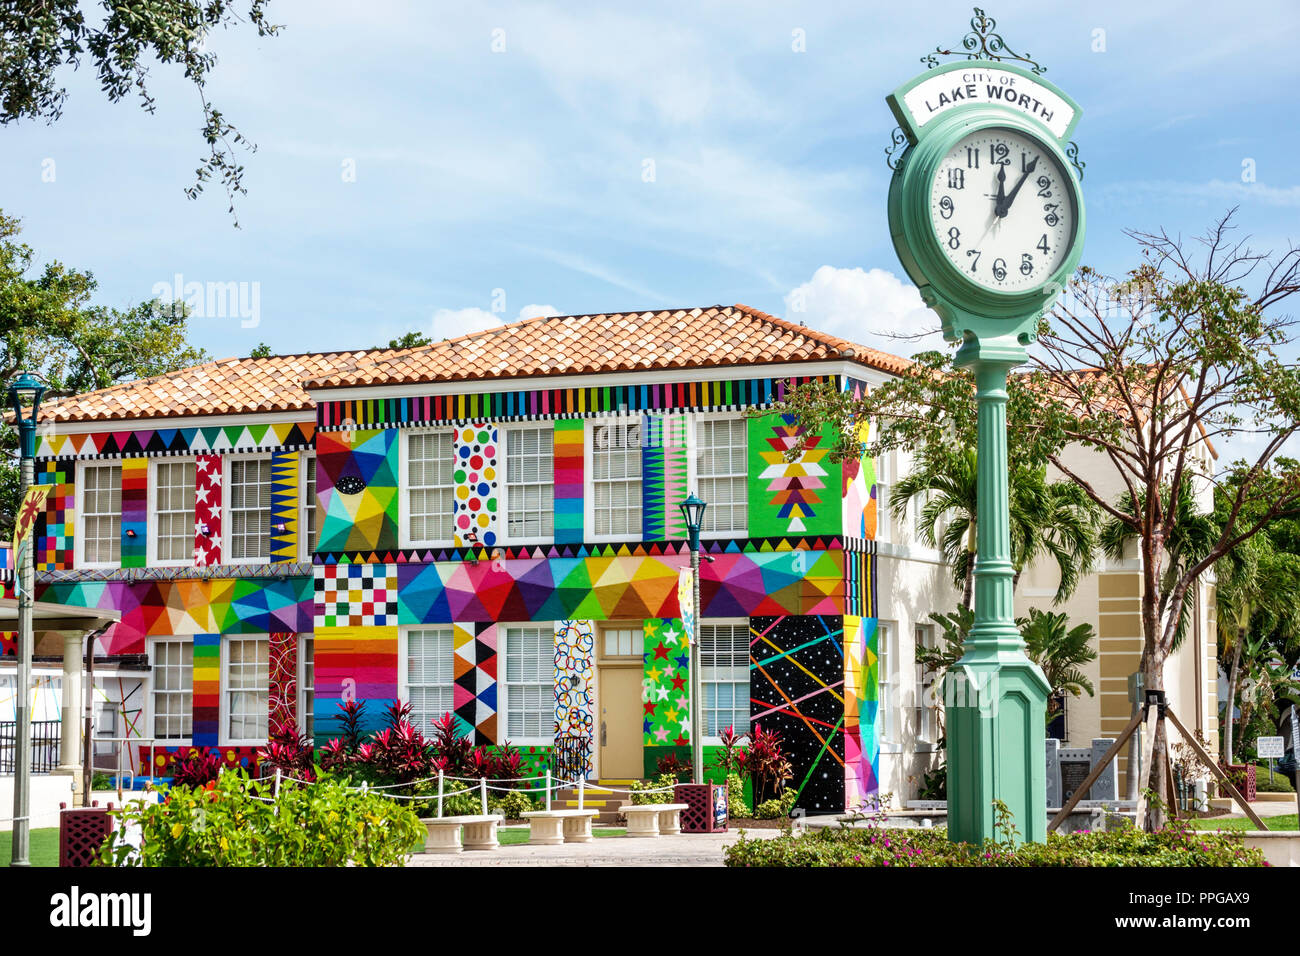 Florida,Lake Worth,Lake Avenue,First Schoolhouse,City Hall Annex,colorful historic building,giant clock,FL180212170 Stock Photo